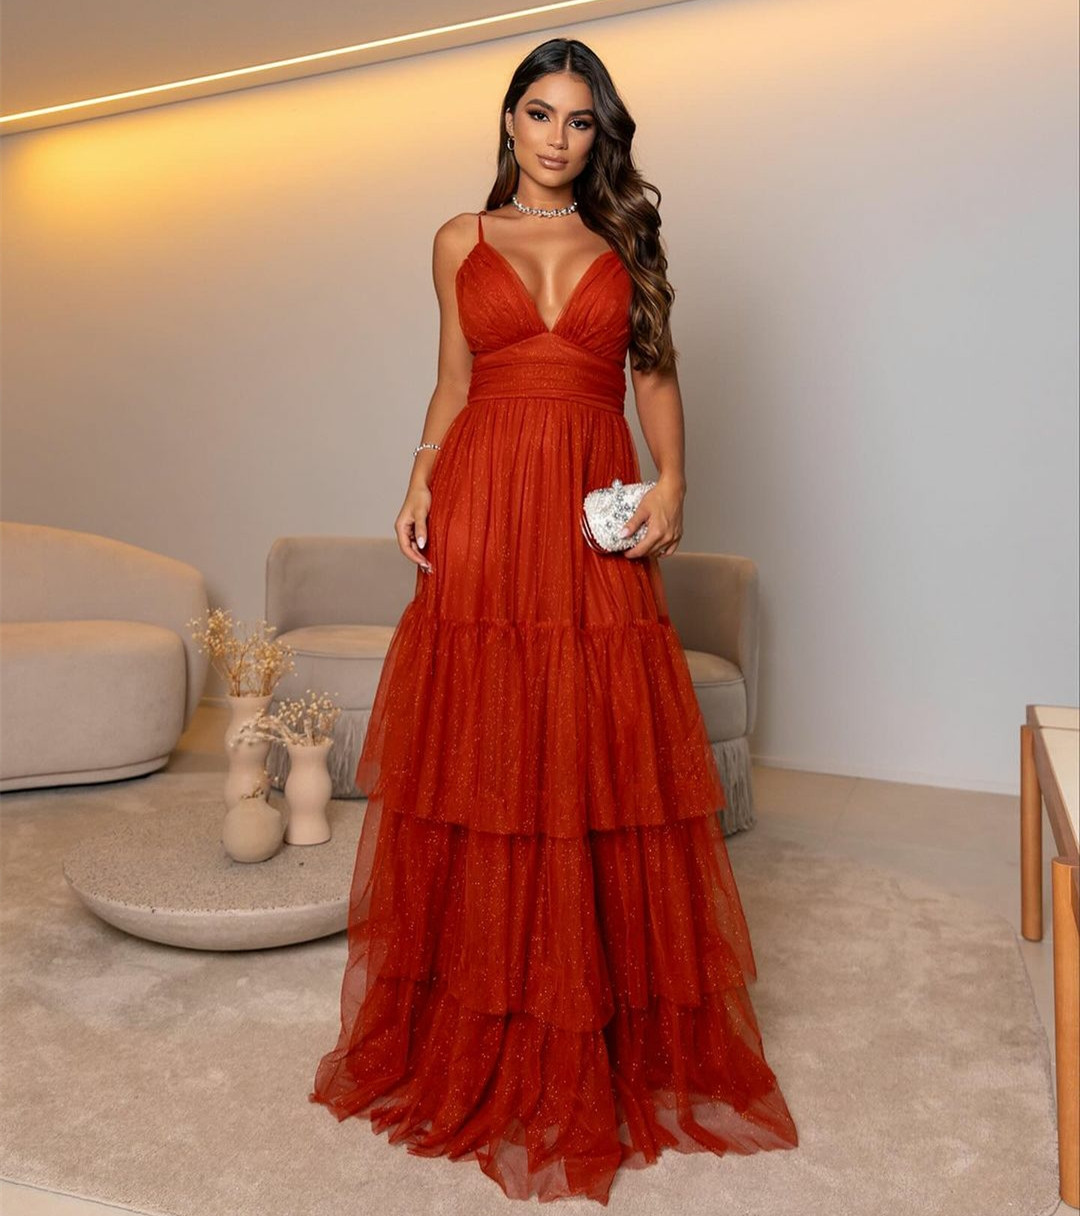 Sexy Long Orange-Red Tulle Pleated Evening Dresses A-Line Spaghetti Zipper Back Floor Length Prom Dresses Robe De Soiree Formal Party Gown for Women